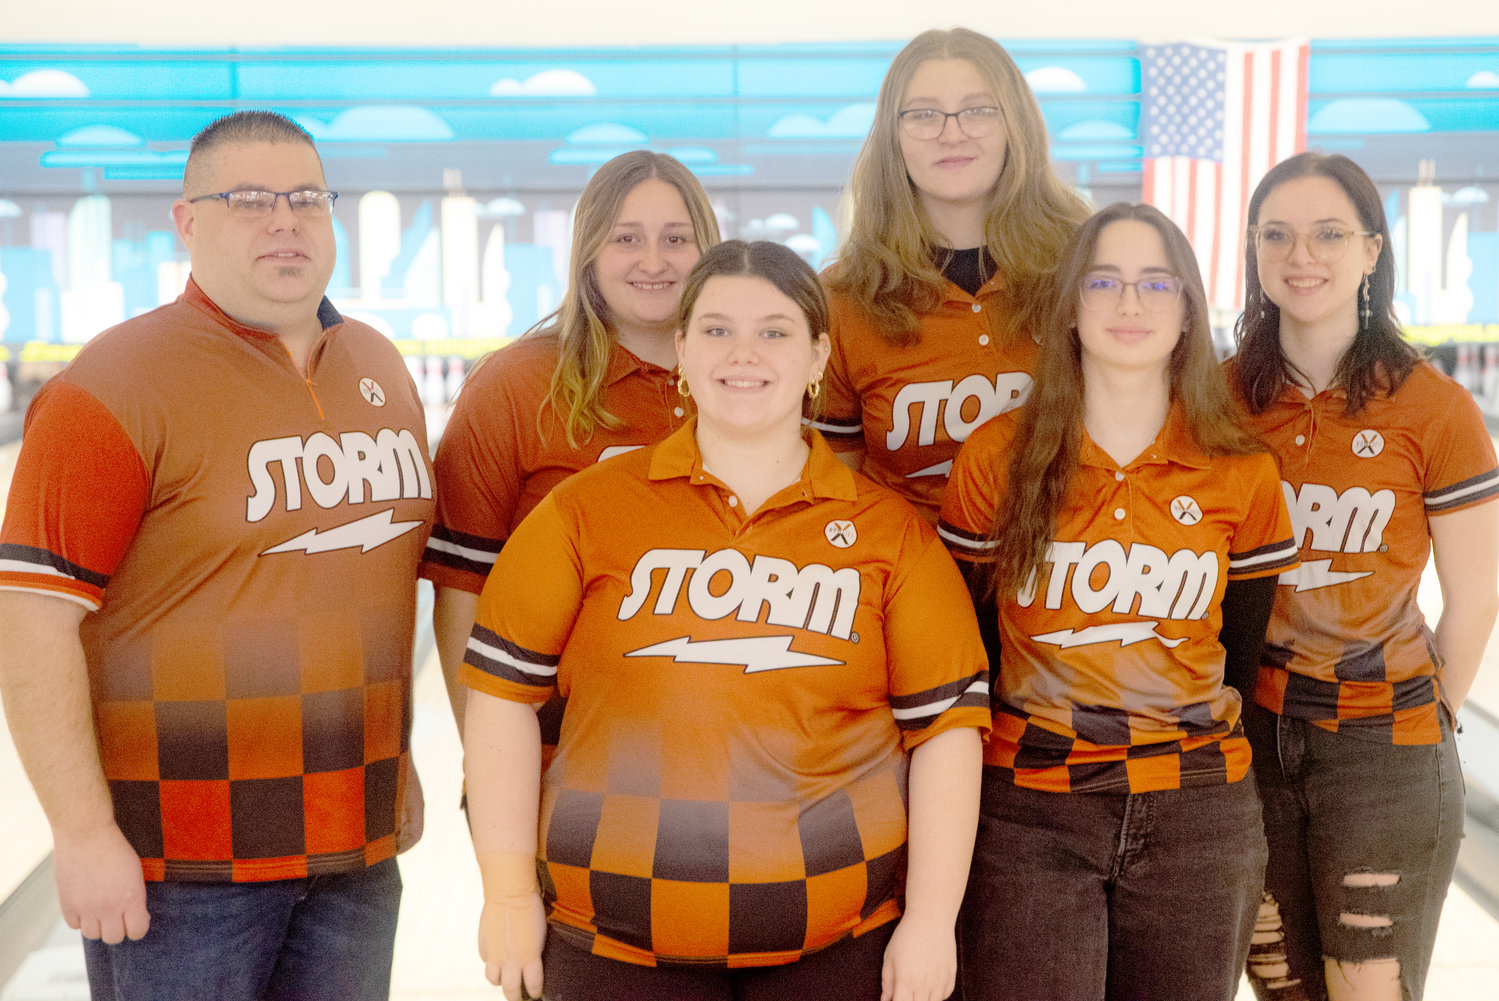 SECTIONAL BOUND — The Rome Free Academy girls bowling sectional team is pictured at their final practice at King Pin Lanes before heading to the Section III Tournament on Sunday at Flamingo Lanes In Liverpool. Pictured from left are coach Bryan Rondeau, Hayley Taylor, Olivia Hluska, Sophia Iglesias-Tosti, Mylie Weyent and Sarah Street. Missing is Izabel Kotary. The action begins at 9 a.m. Tickets are available at https://section3.org/sports/2021/4/29/hometown-ticketing.aspx The format for the tournament is two three-game blocks. The winner is determined by total pinfall for the six games and will represent Section III in the state tournament which are scheduled for March 12 at Strike and Spare in Syracuse. The Black Knights won the Tri-Valley League Tournament at Pin O Rama to close out a 10-2 regular season.